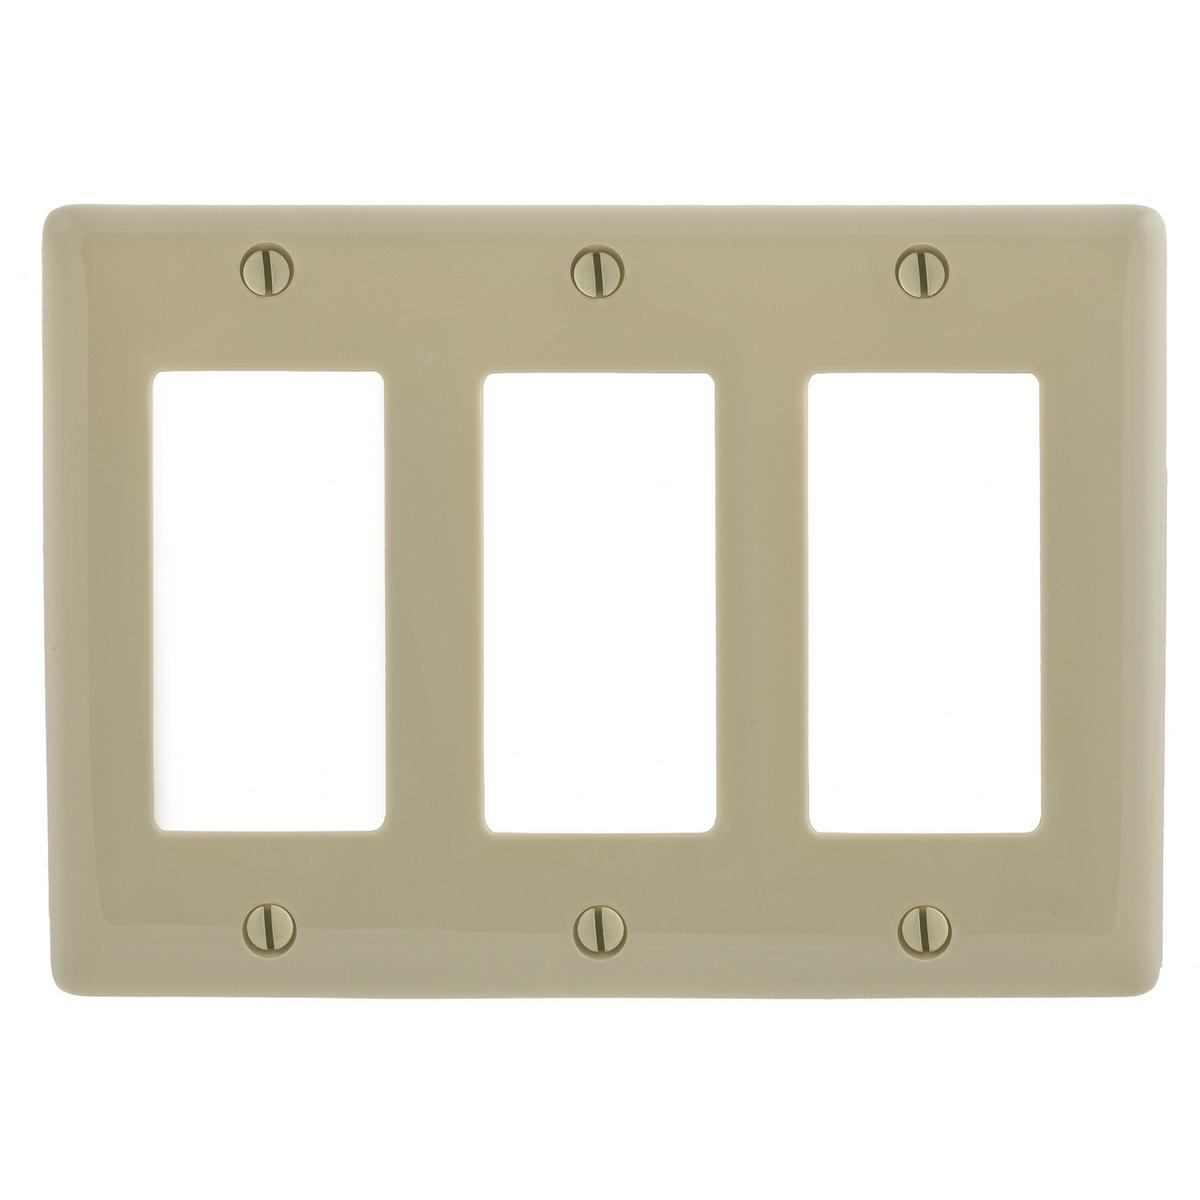 Hubbell NPJ263I Wallplates and Box Covers, Wallplate, Nylon, Mid-Sized, 3-Gang, 3) Decorator, Ivory  ; Reinforcement ribs for extra strength ; Curved corners for improved aesthetics ; High-impact, self-extinguishing nylon material ; Standard Size is 1/8" larger to give y